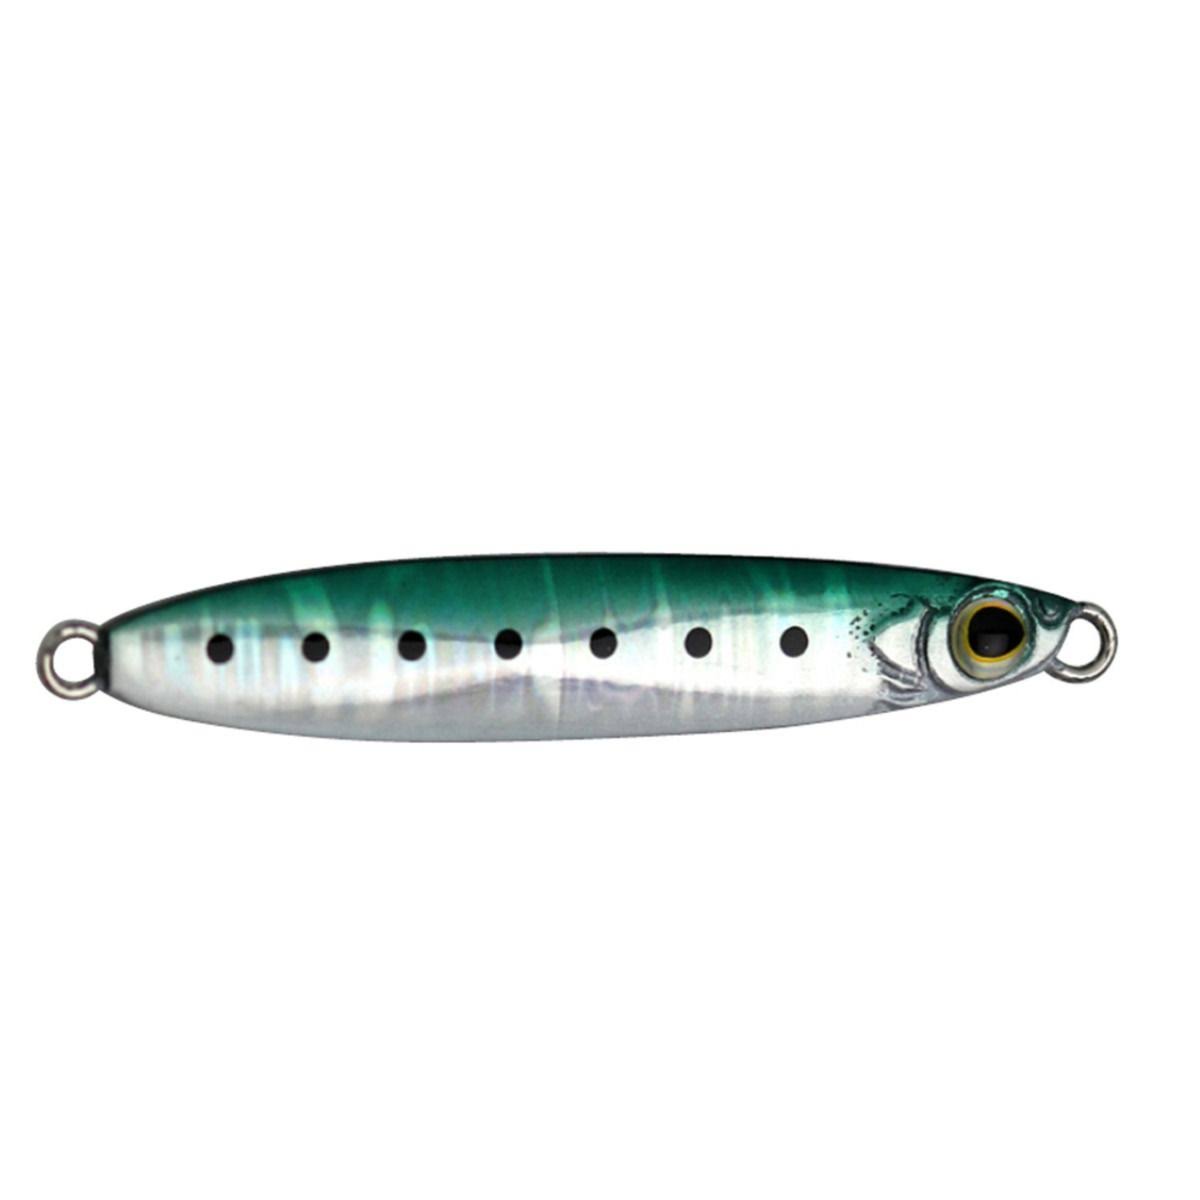 Shimano Coltsniper Jig Slow Fall Lure | Boating & Fishing | Best Price Guarantee | 30 Day Money Back Guarantee | Free Shipping On All Orders